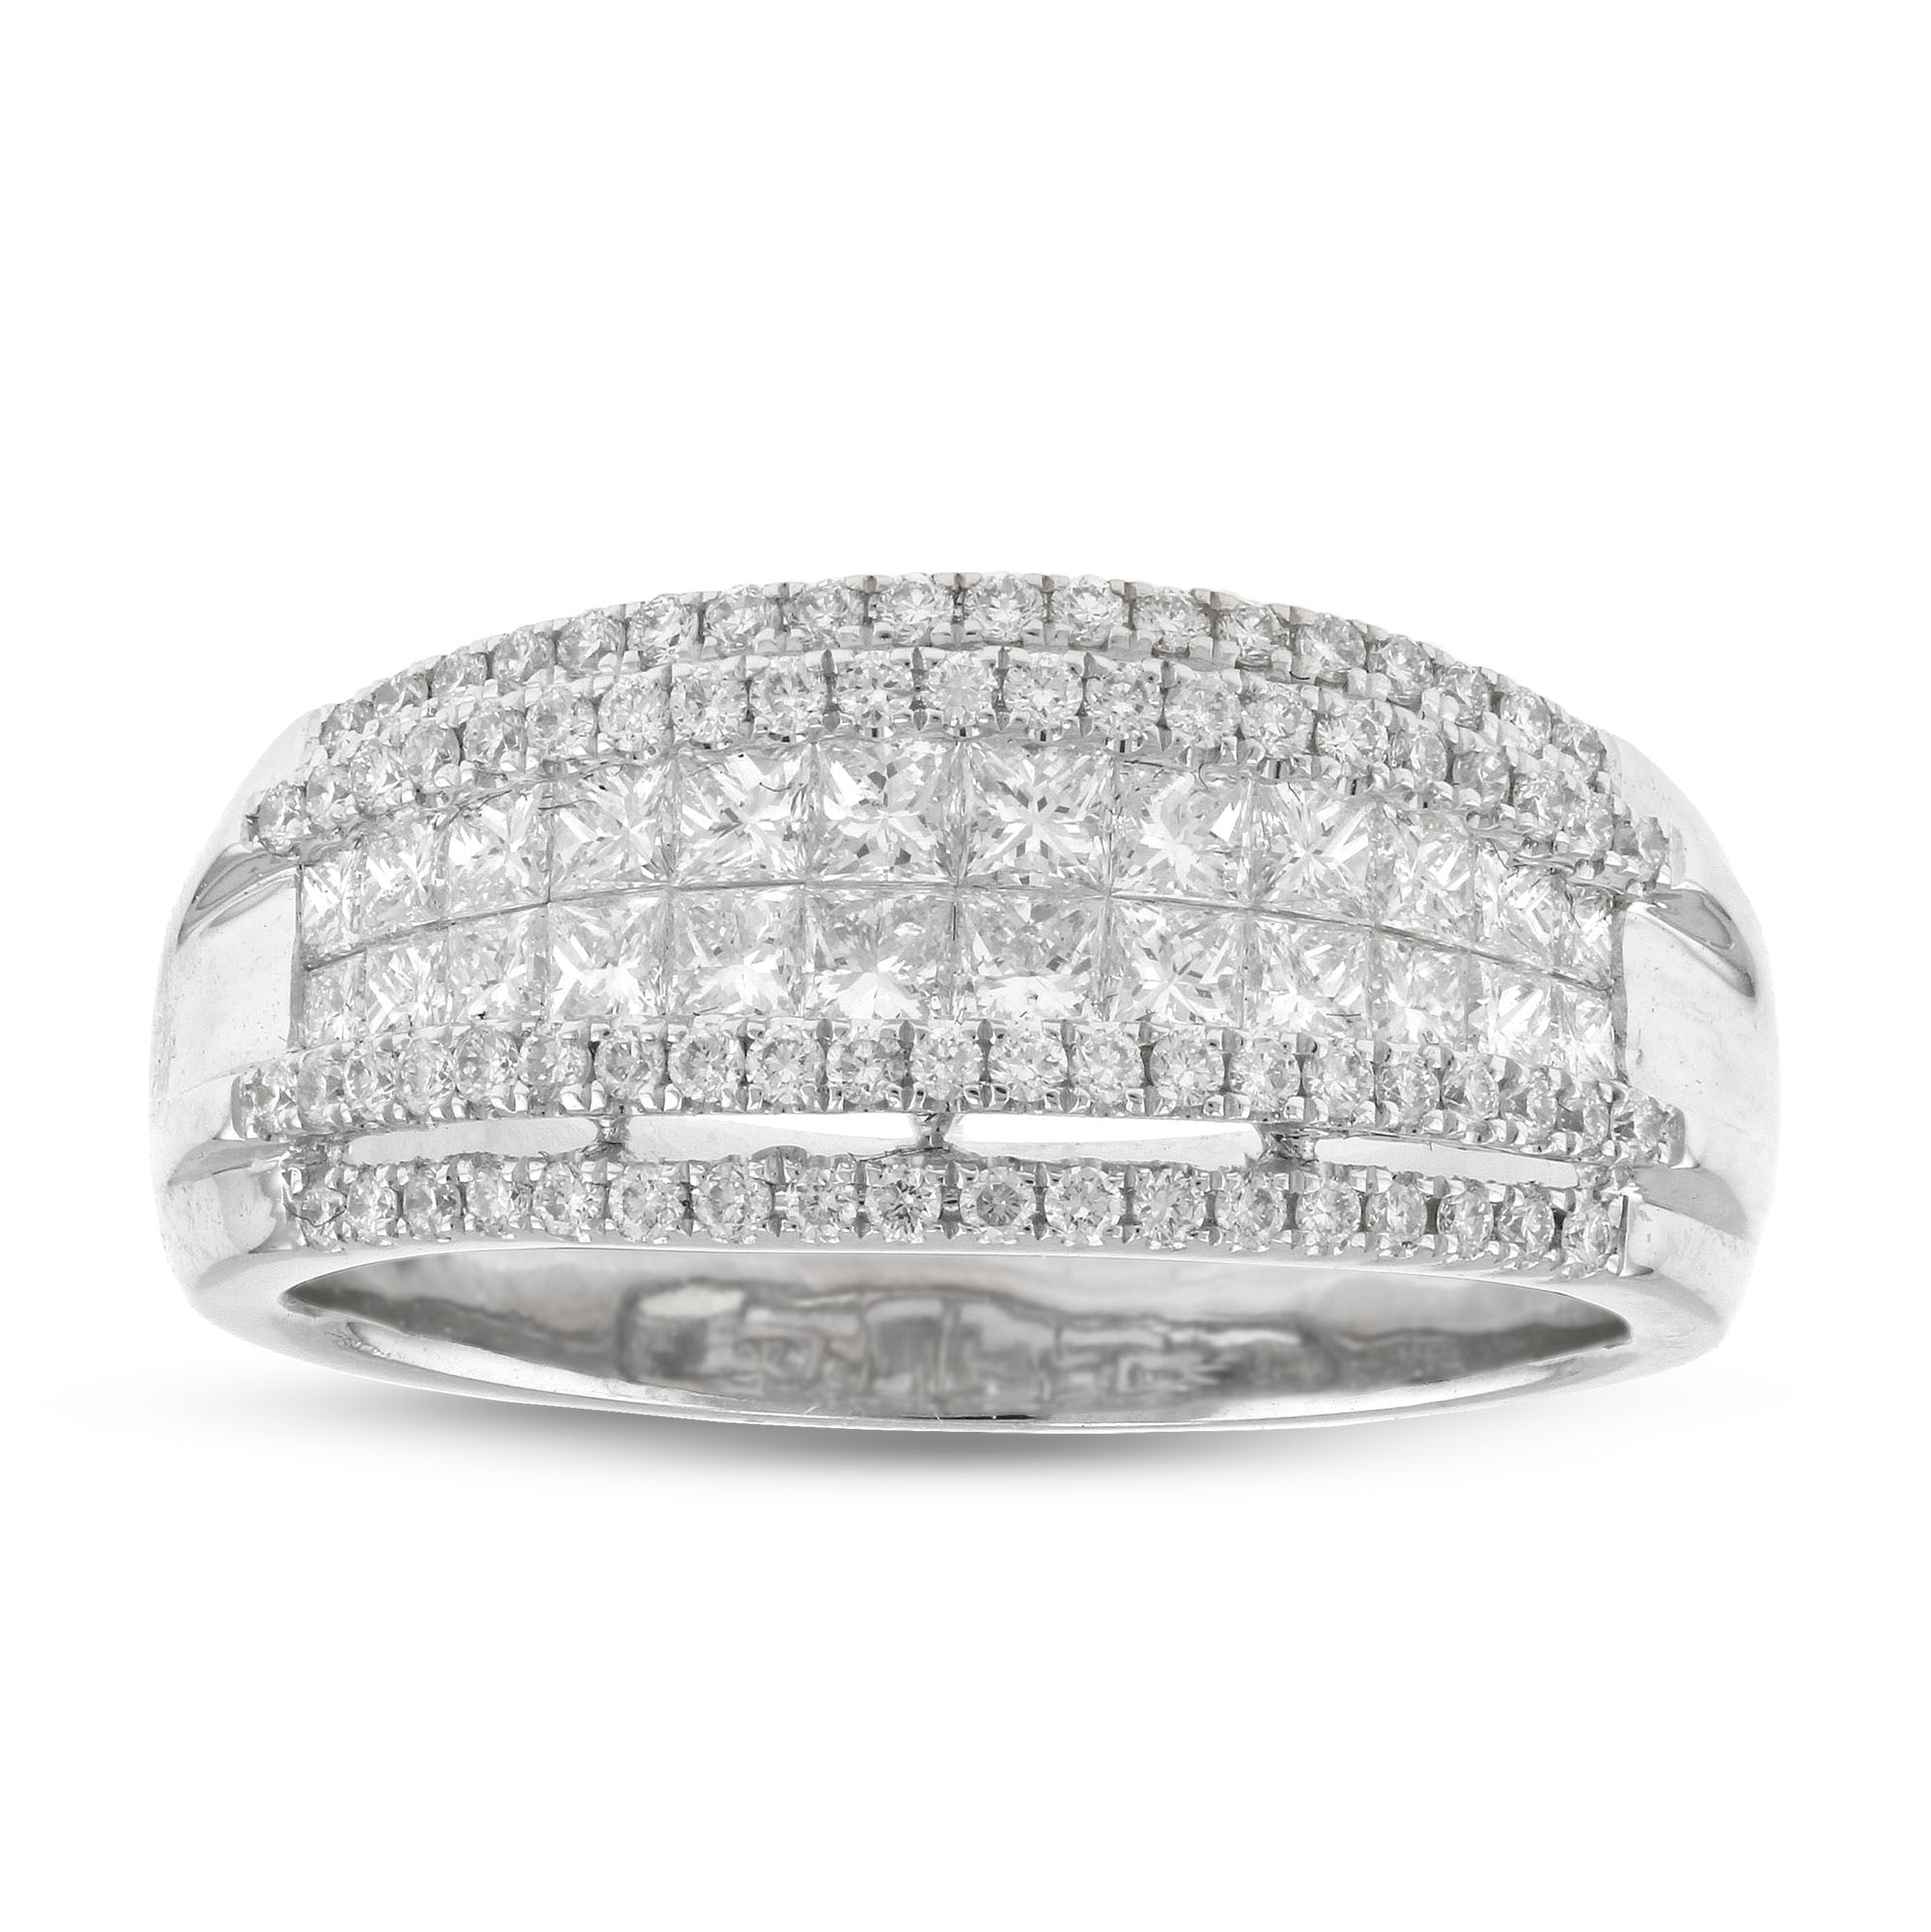 View 1.07ctw Fashion Band in 18k White Gold